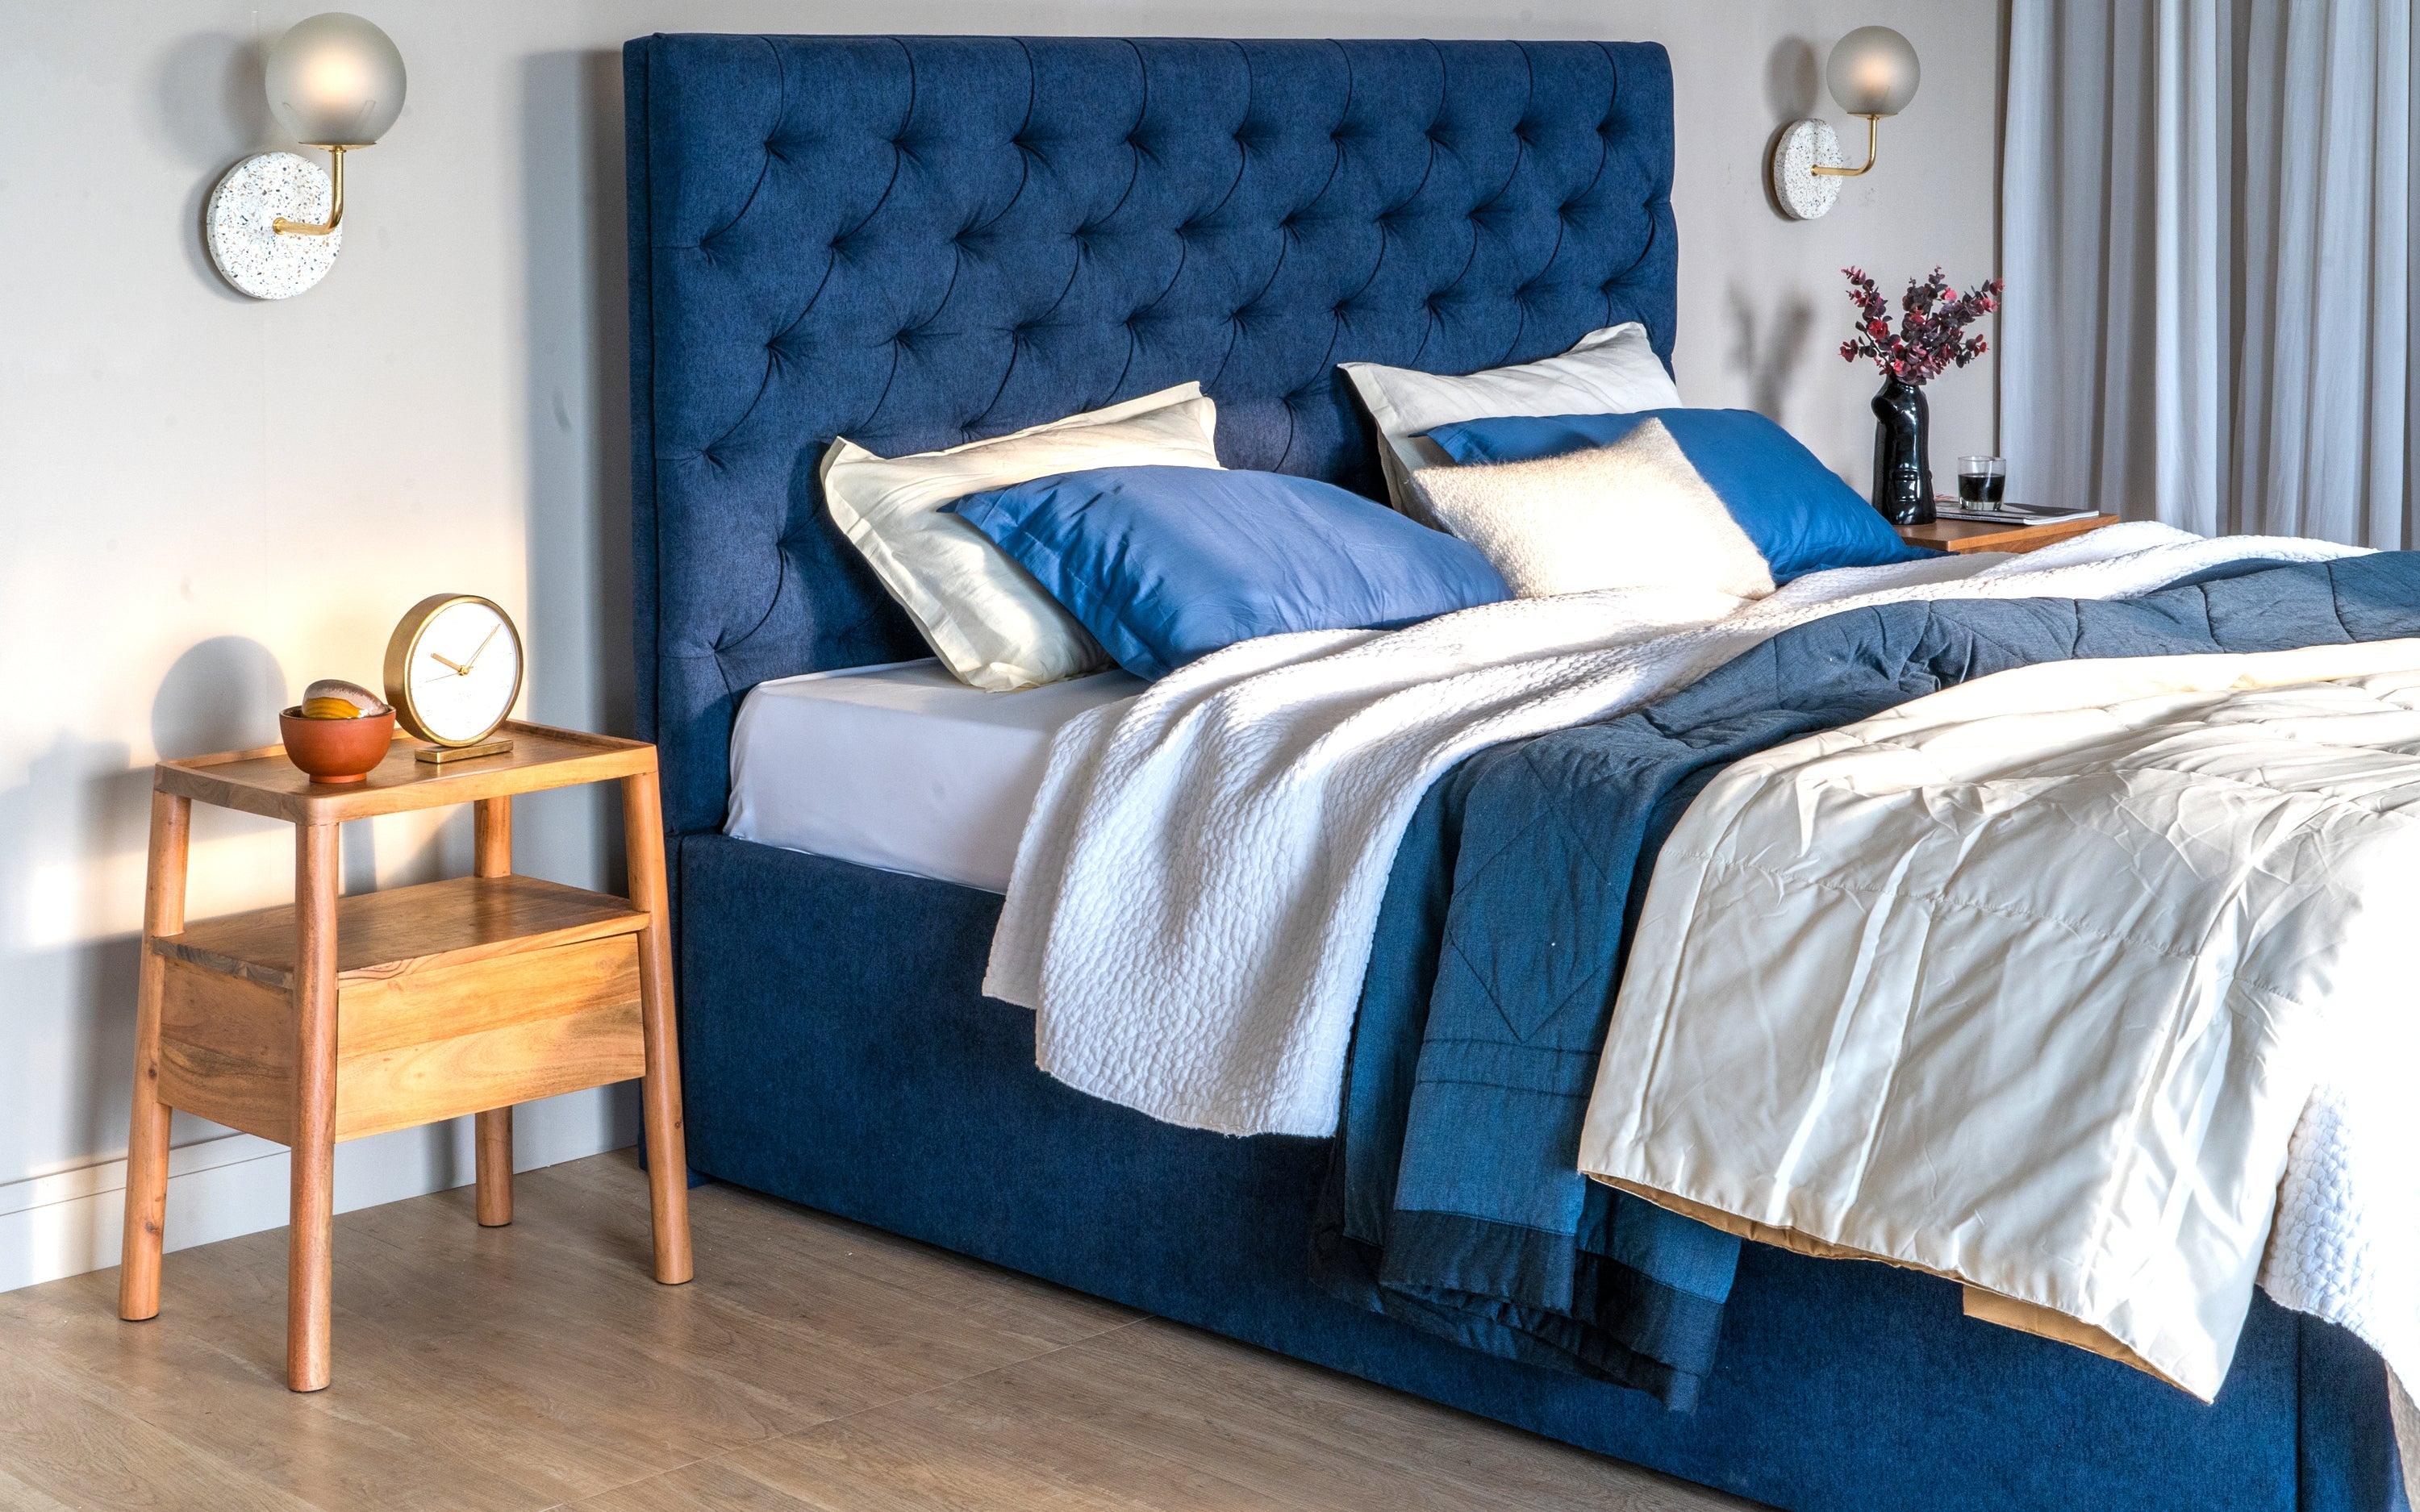 Luxury upholstered blue headboard with coordinating bedding and decor